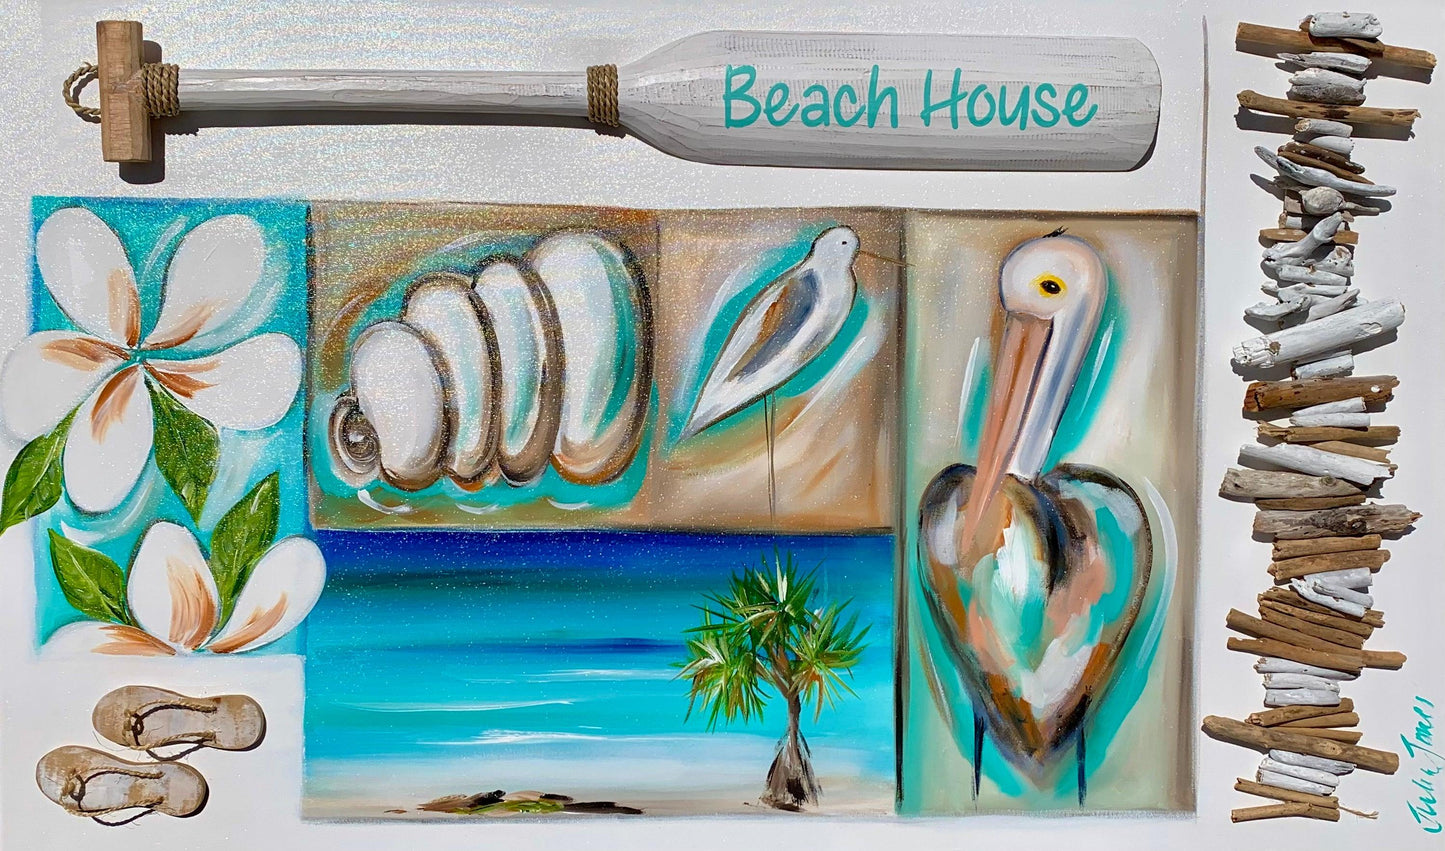 Rustic Beach House 3D- 1.5x900 - Original Artwork - Available by Commision